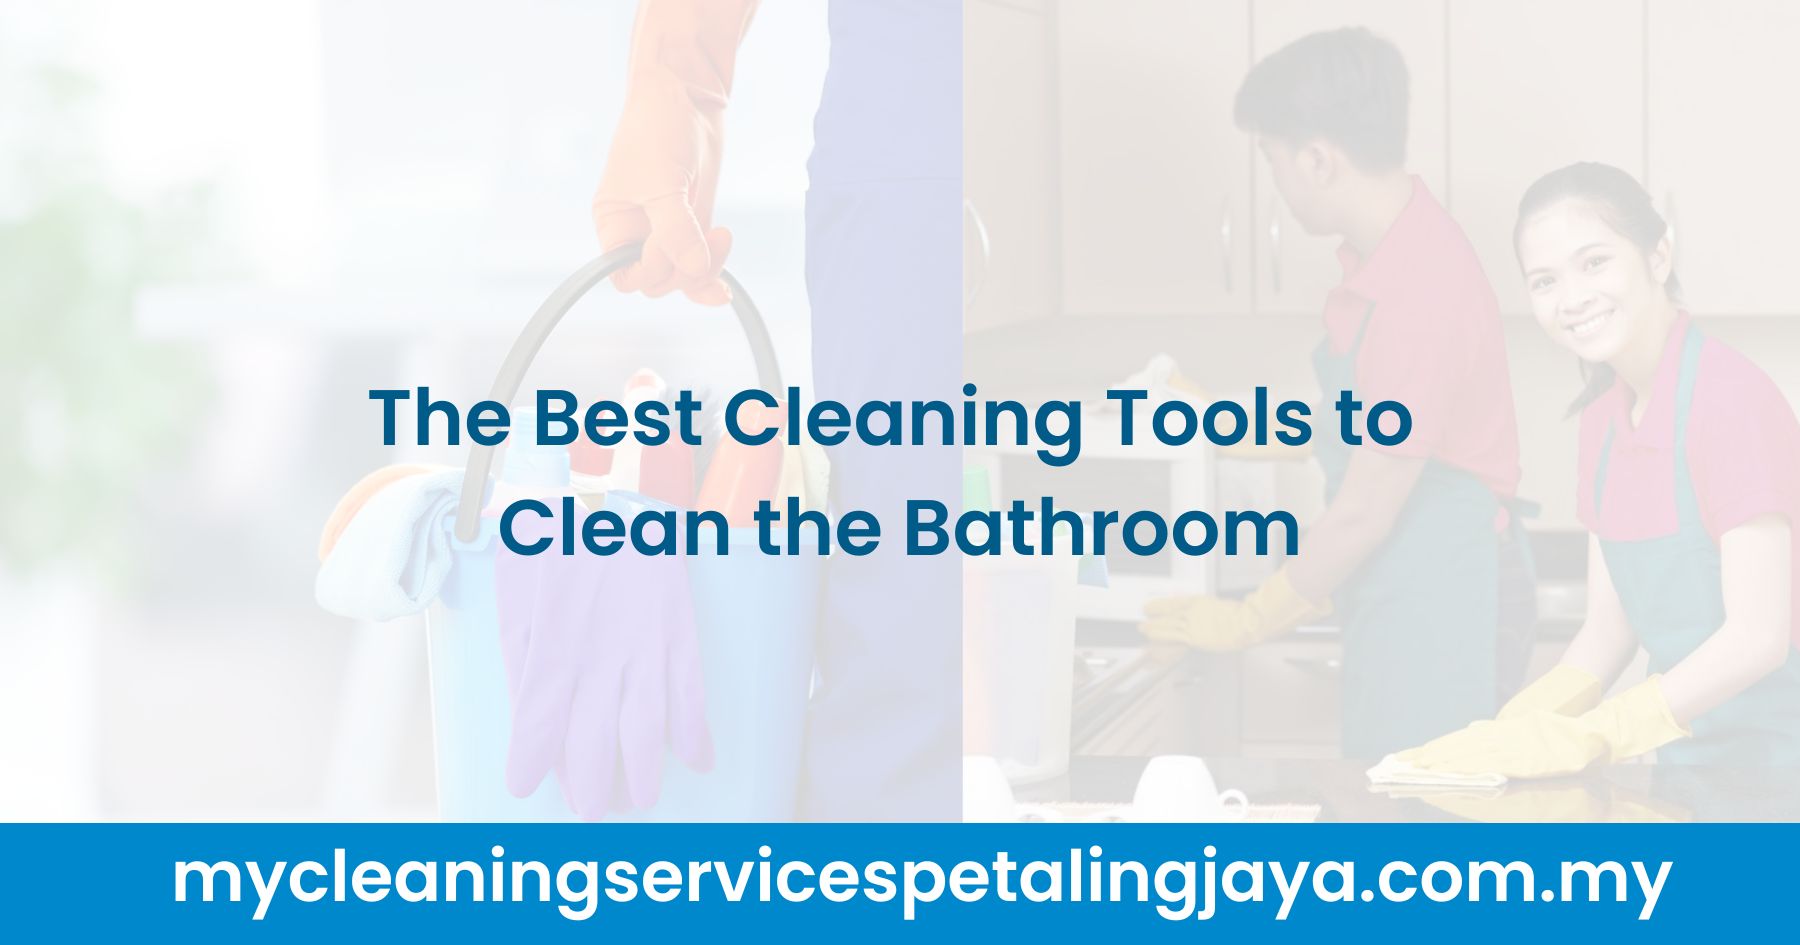 The Best Cleaning Tools to Clean the Bathroom